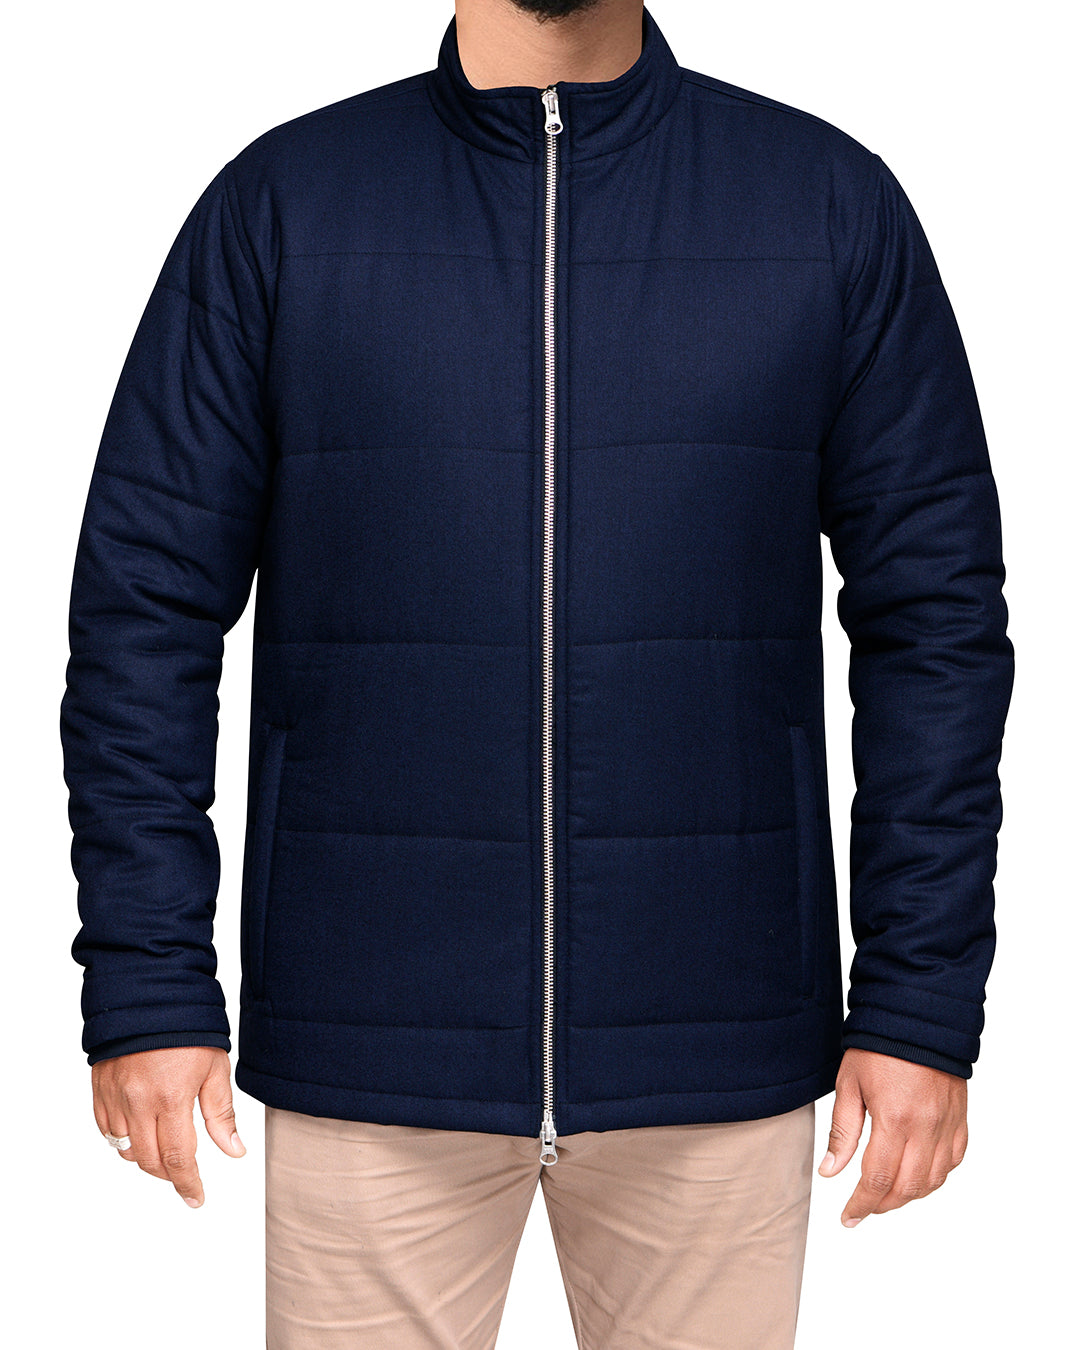 VBC Navy Wool Flannel Zipper Quilted Jacket